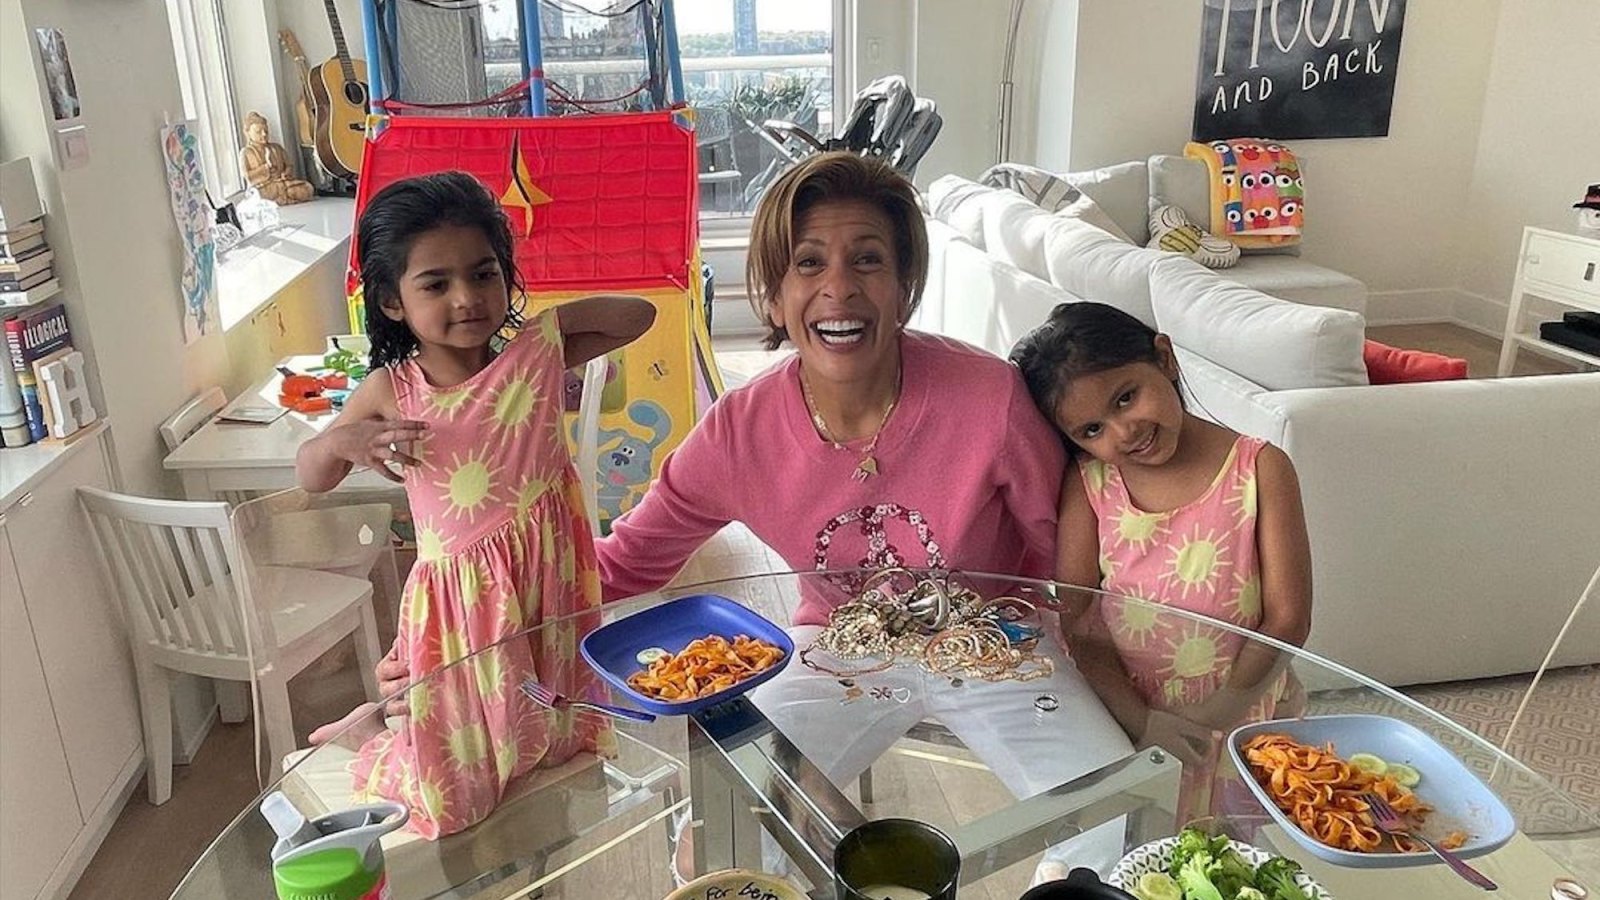 Hoda Kotb Encourages Her Daughters to Share During Easter Egg Hunt in Apartment